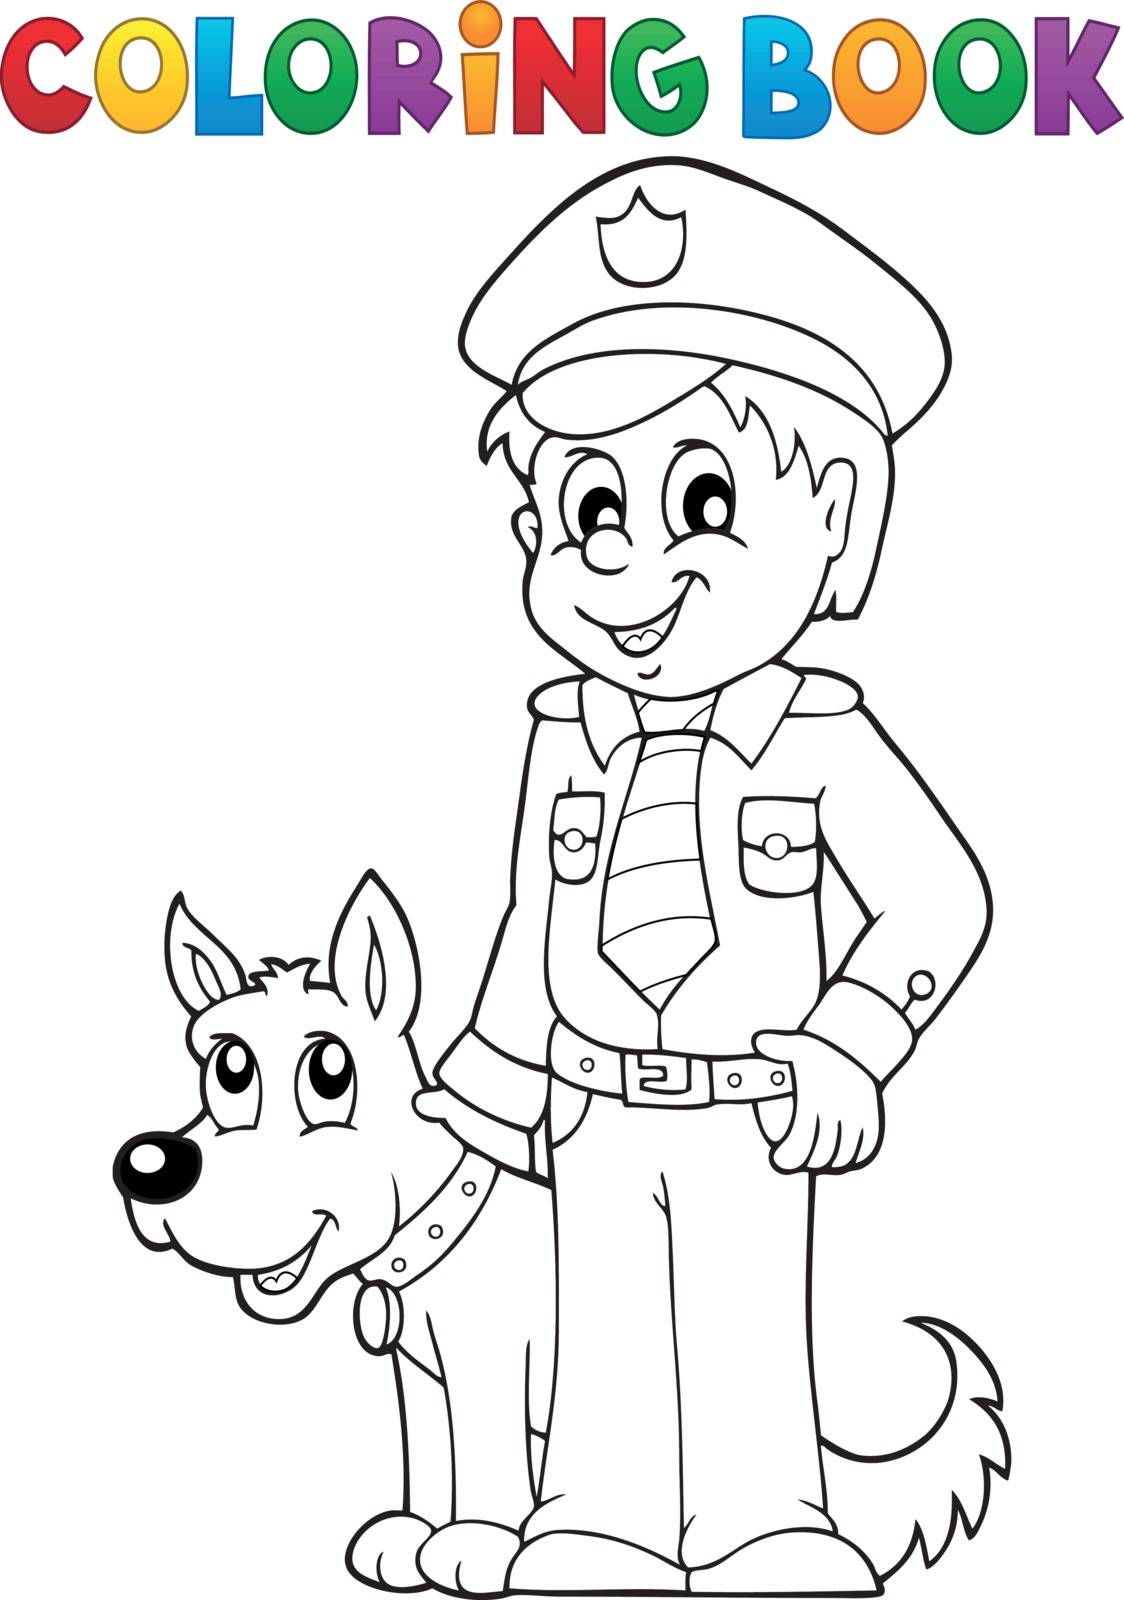 Coloring book policeman with guard dog - eps10 vector illustration.